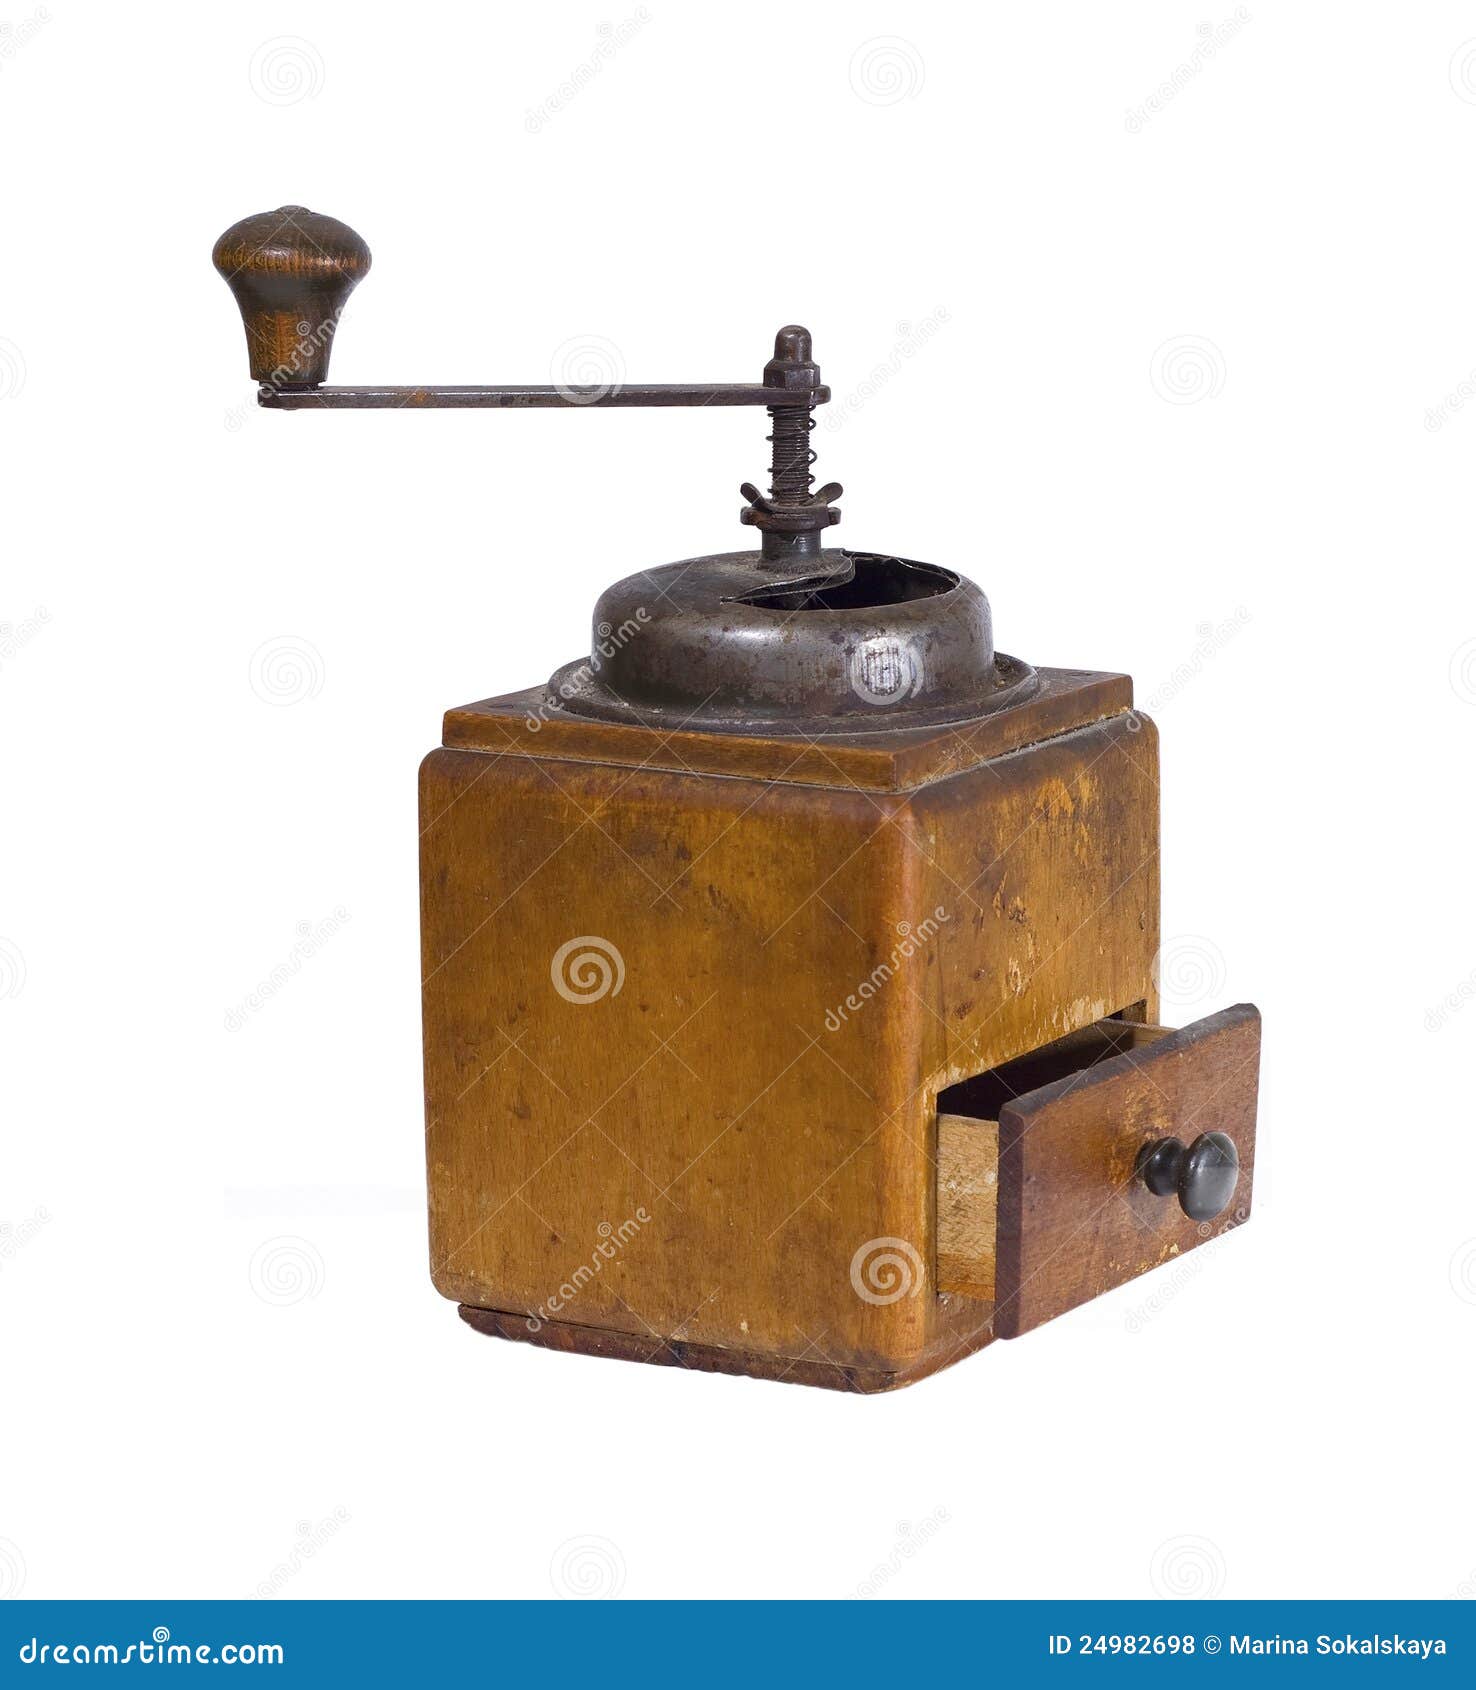 coffee grinder clipart - photo #42